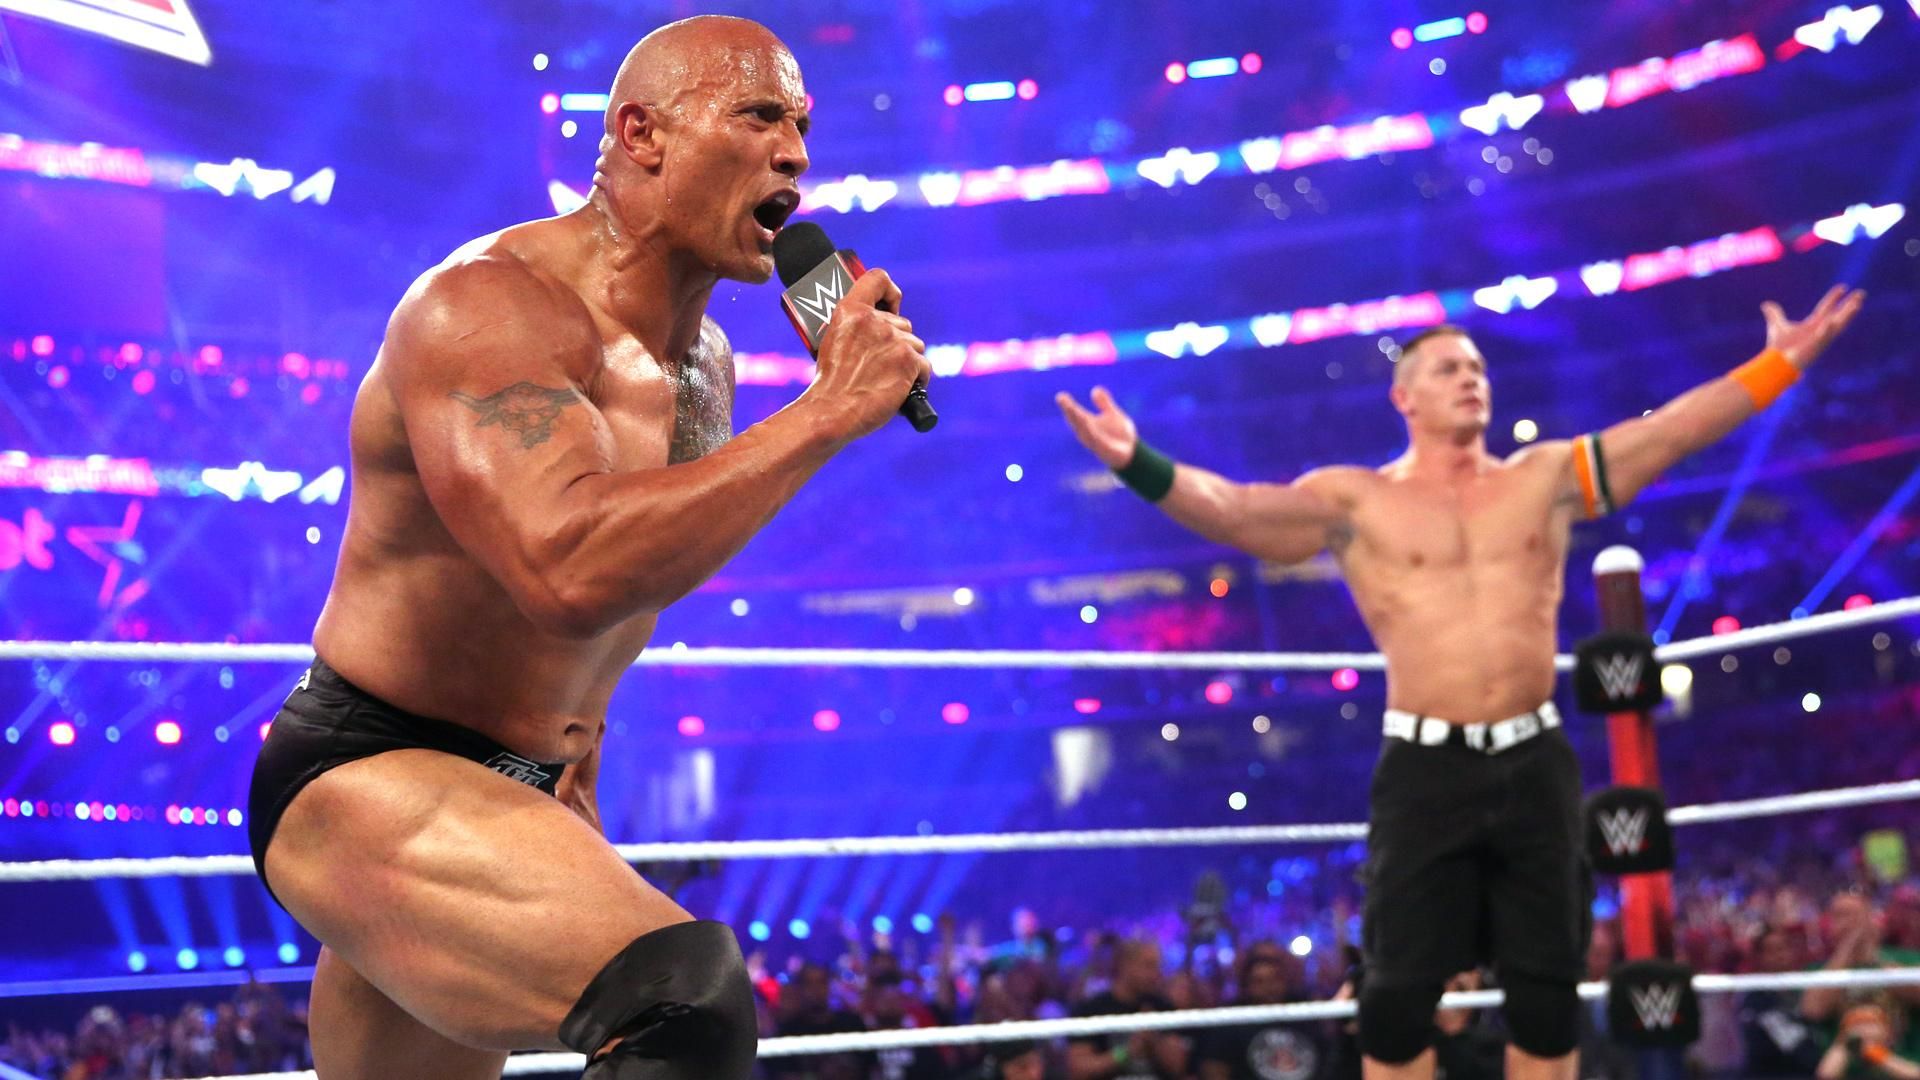 Why The Rock’s last match is not one that you expected